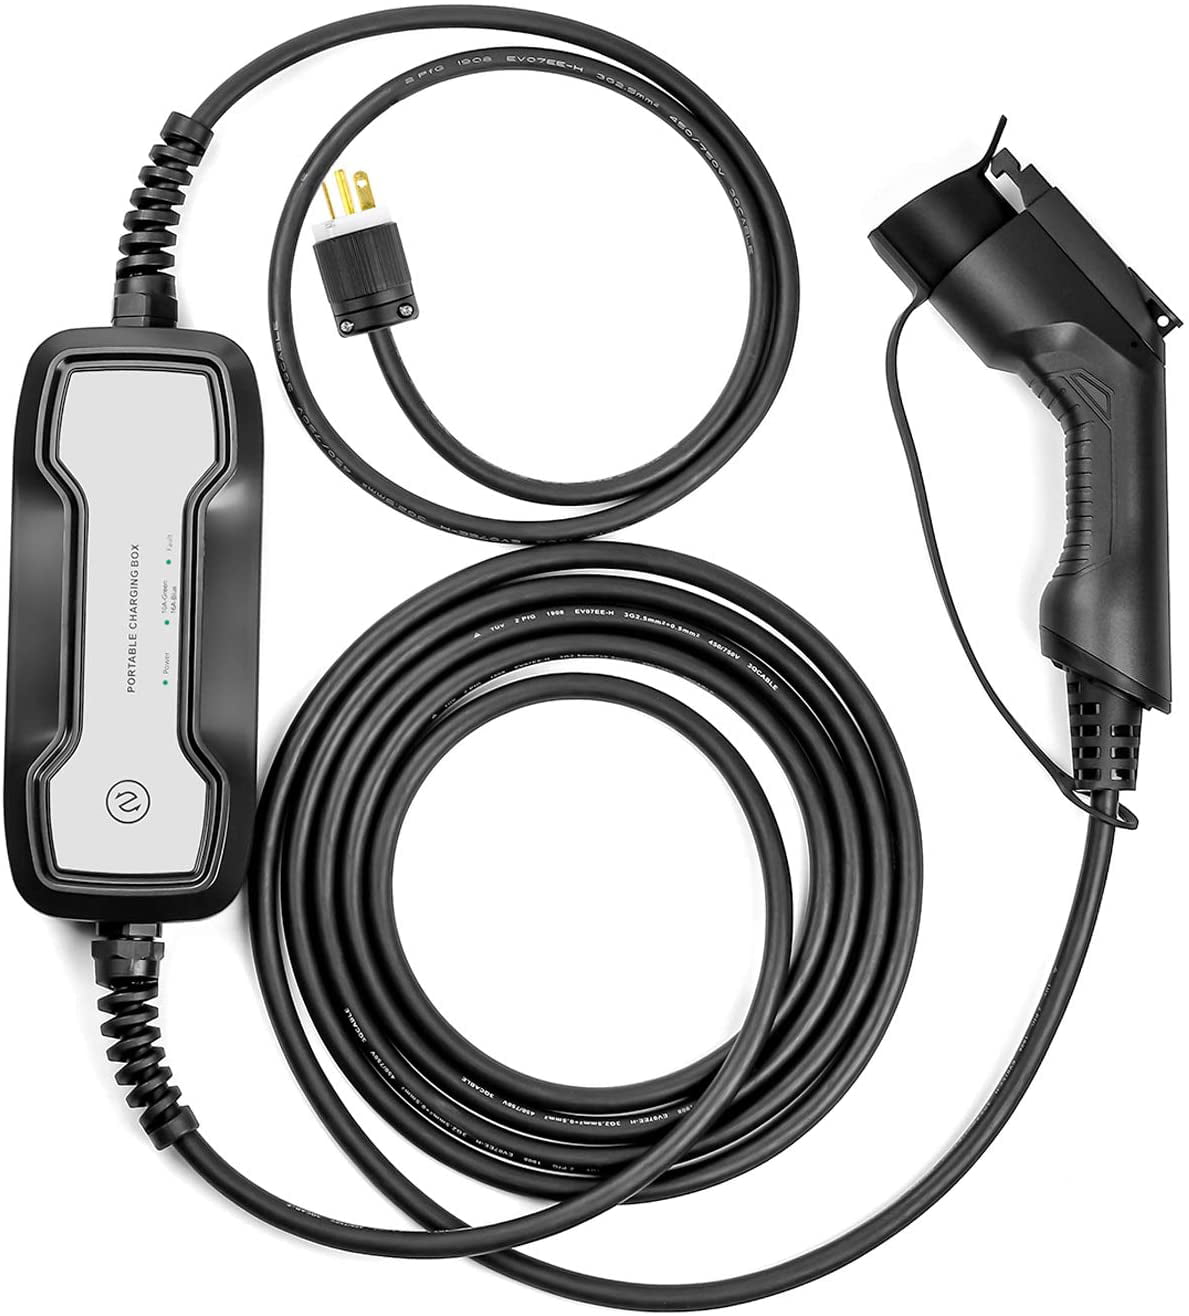 Fiat Portable EVSE Electric Vehicle Charging Station Compatible with Level 1 for Chevy Volt 240V, 16A, 25FT Ford Fusion BMW Nissan Leaf BougeRV Level 2 EV Charger Cable 